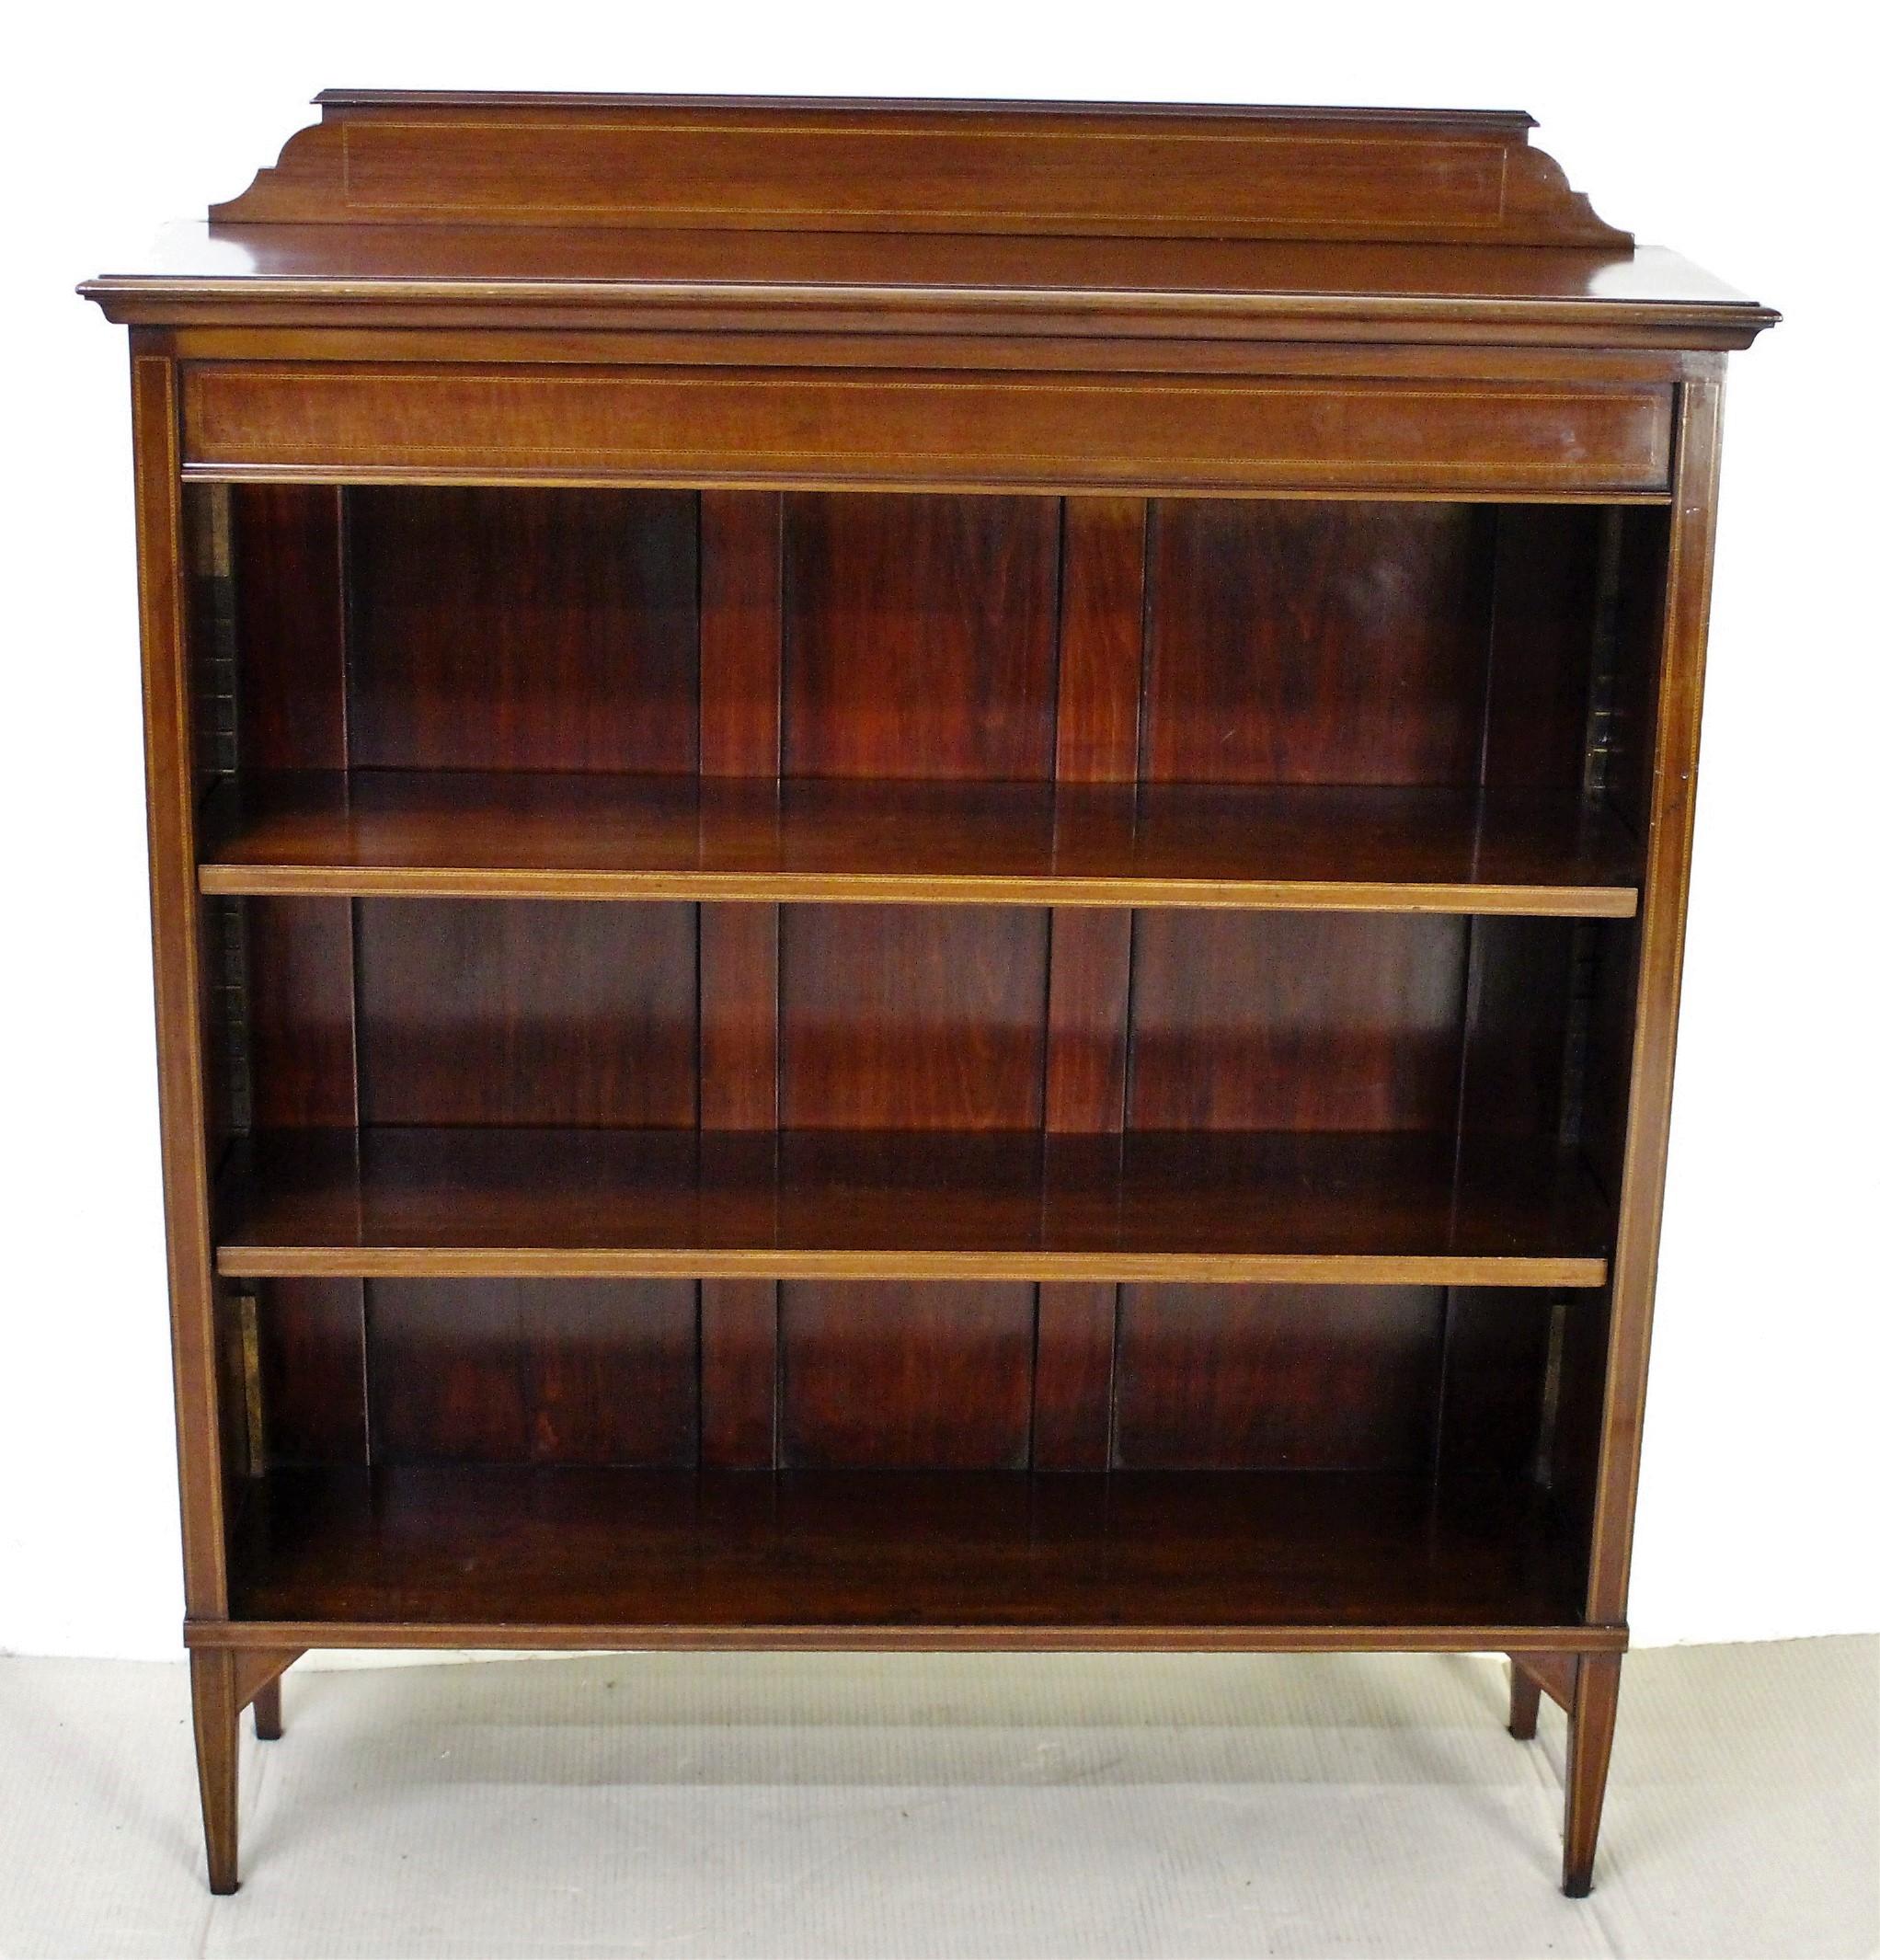 An excellent Edwardian period inlaid mahogany open bookcase. Well-constructed in solid mahogany and decorated with cross banding and chequer banding inlay in boxwood. The top with an up-stand and all standing on tapering legs. The display space